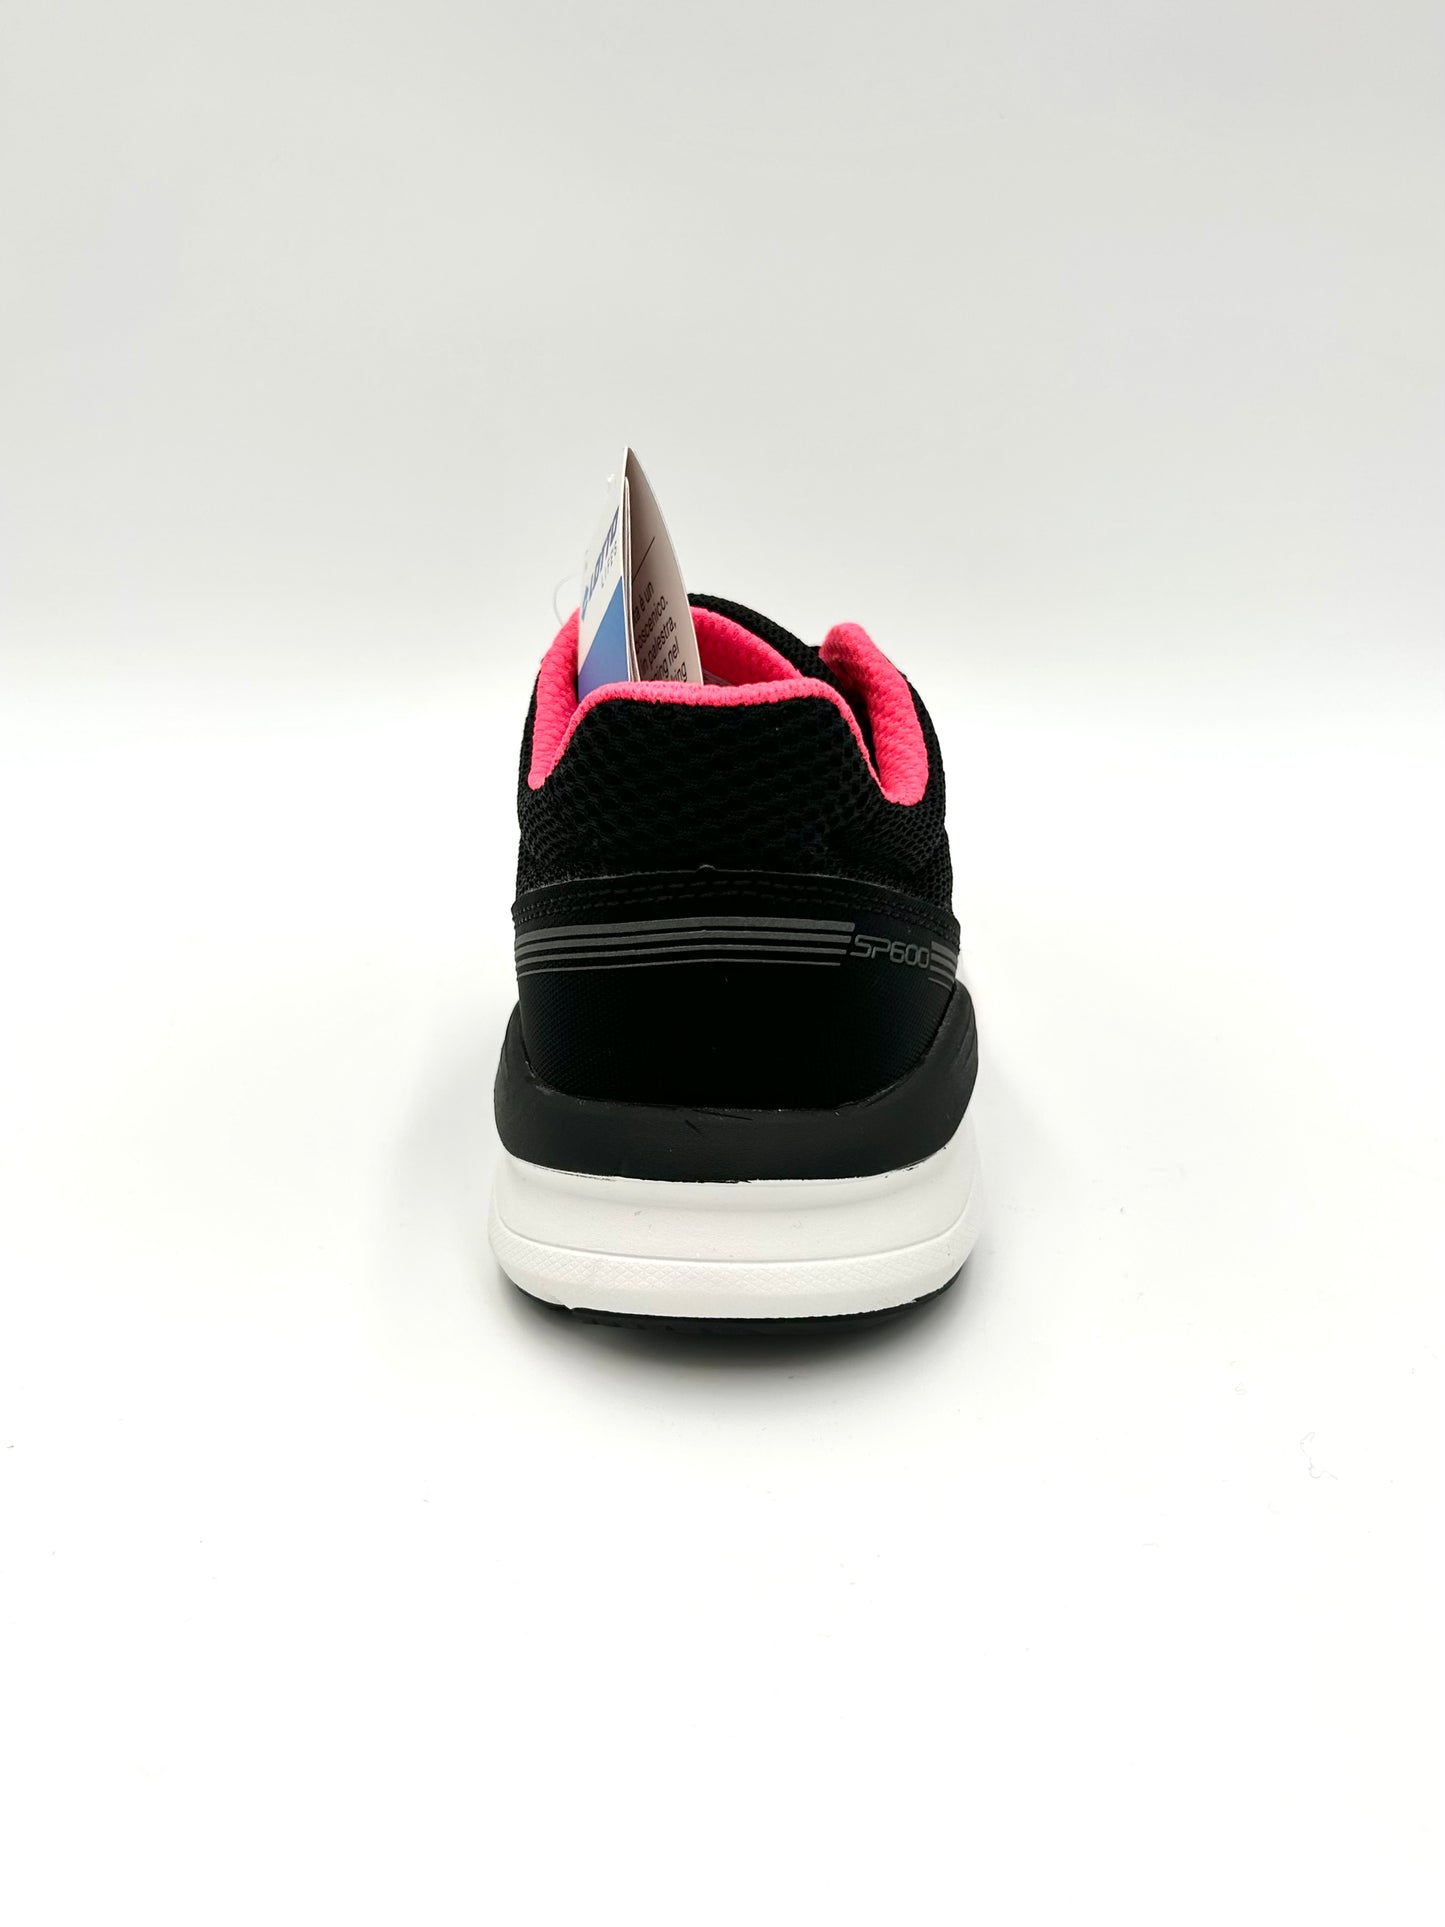 Lotto Sneakers Speedride 600 - black and pink - Lotto